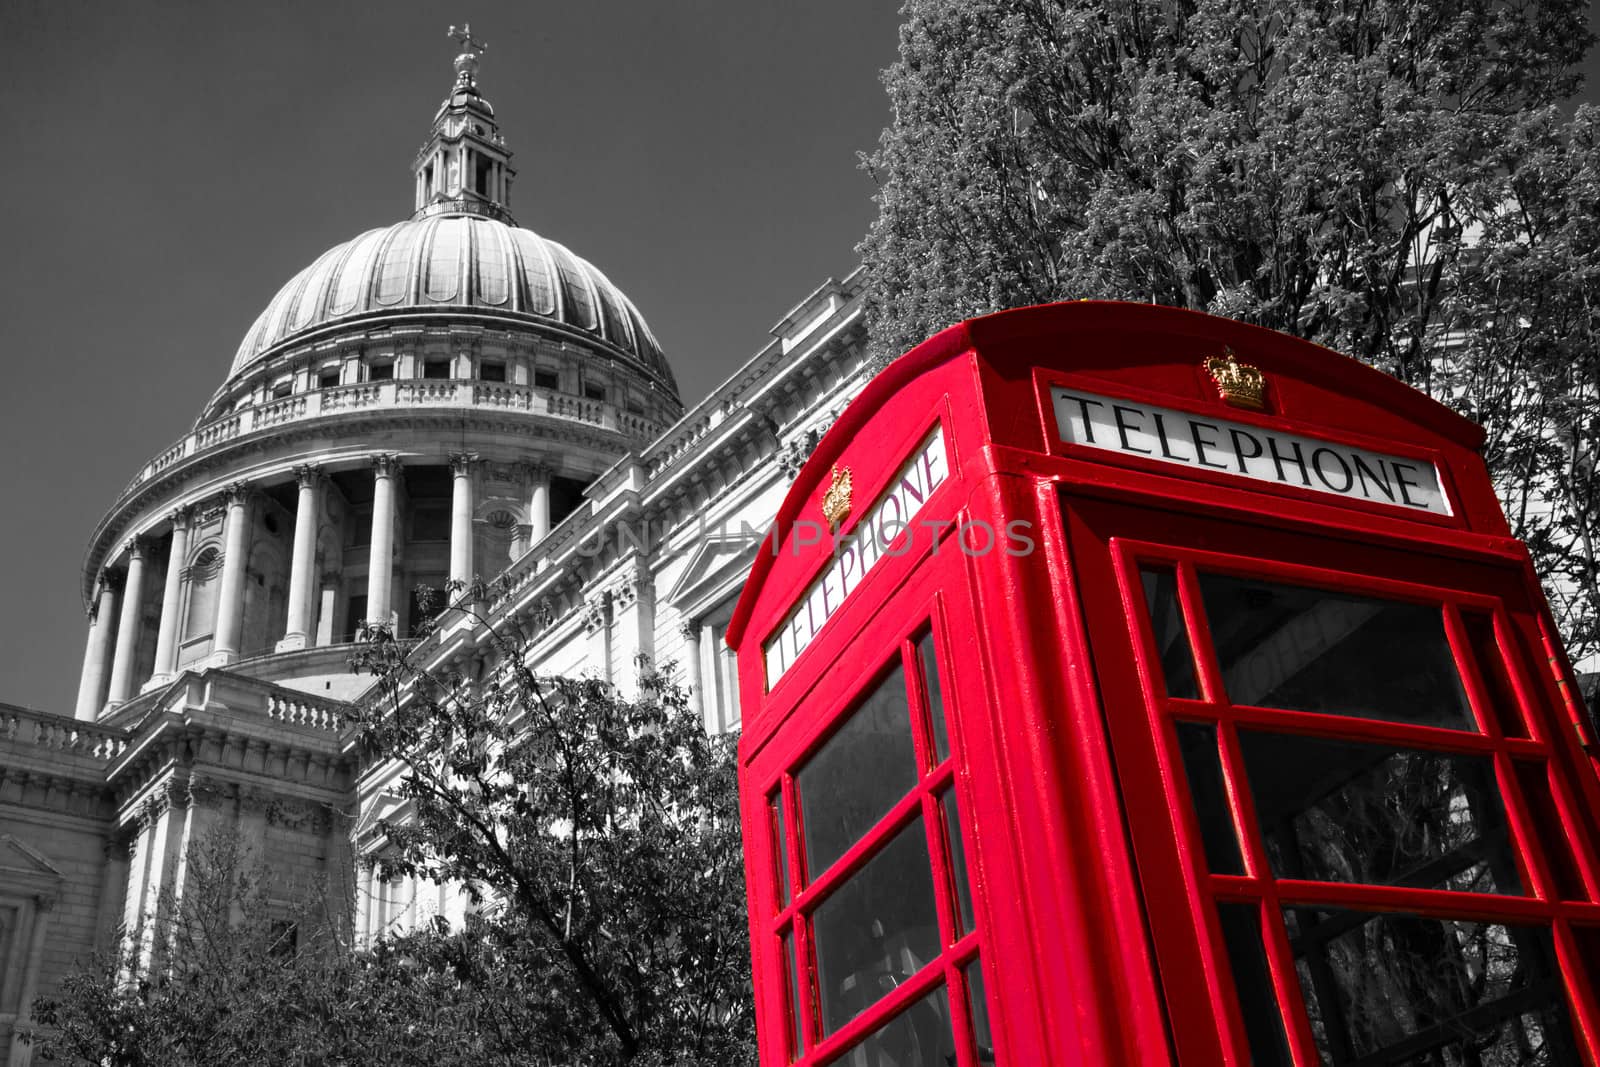 London phone box at St Paul's Cathedral by darrenp